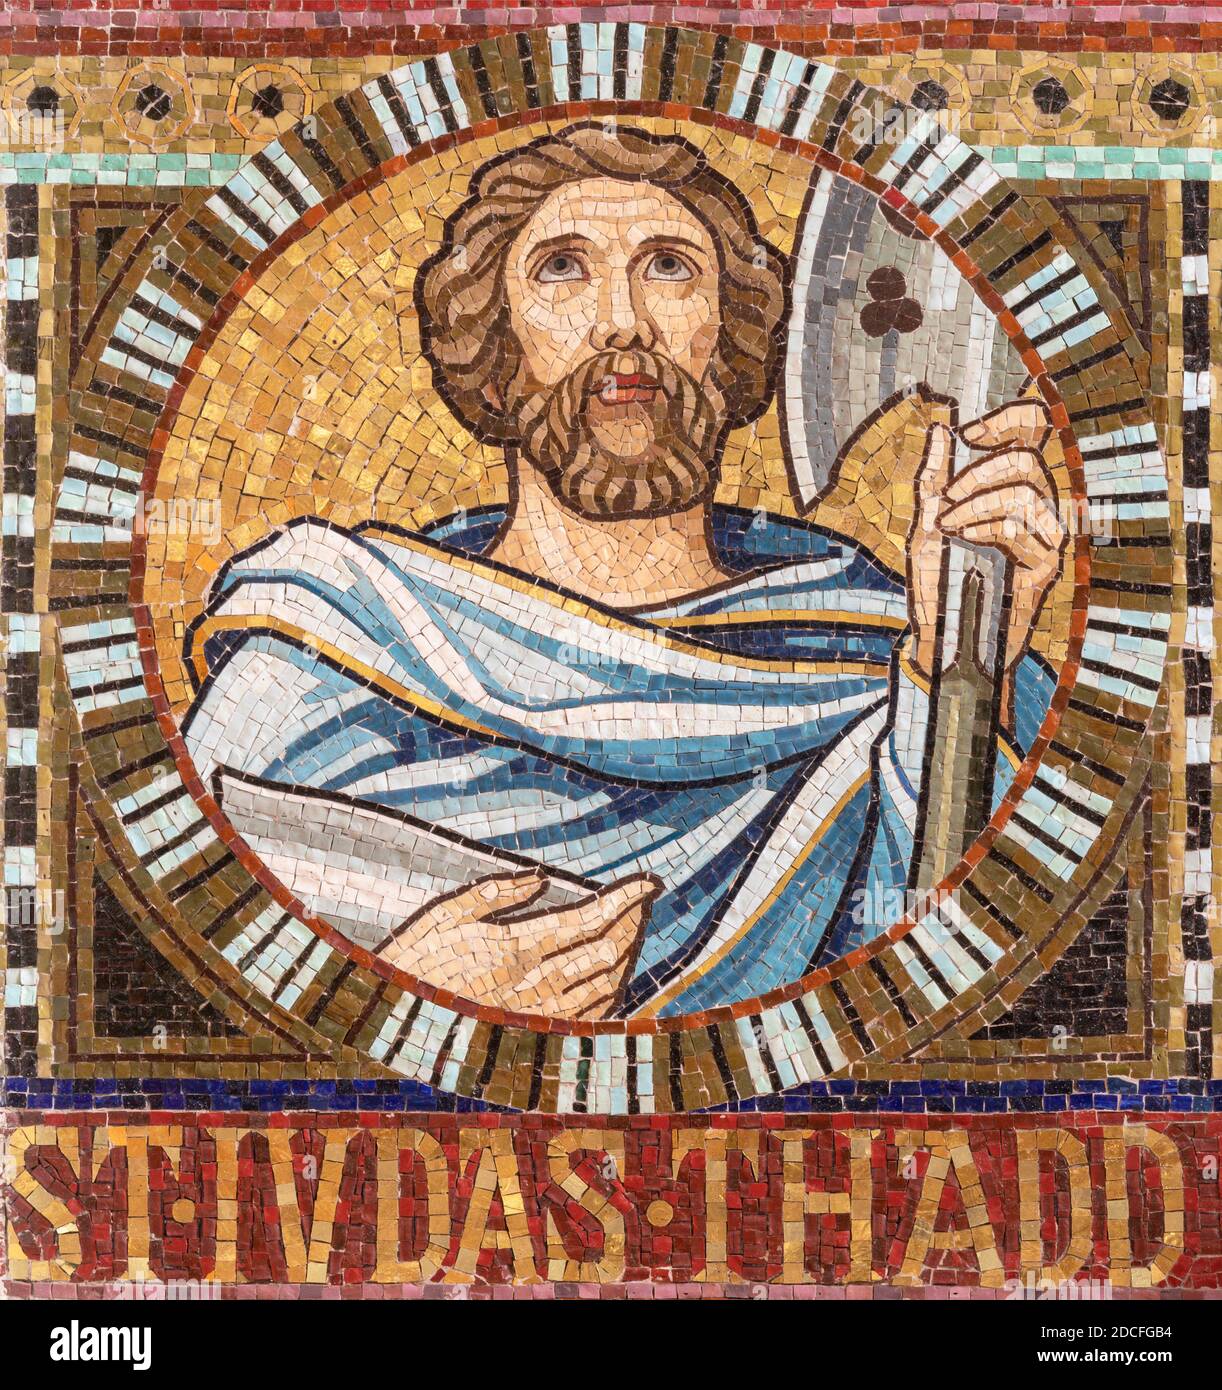 VIENNA, AUSTIRA - OCTOBER 22, 2020: The detail of apostle St. Jude Thaddeus from mosaic of Immaculate Conception in church Pfarrkirche Kaisermühlen. Stock Photo